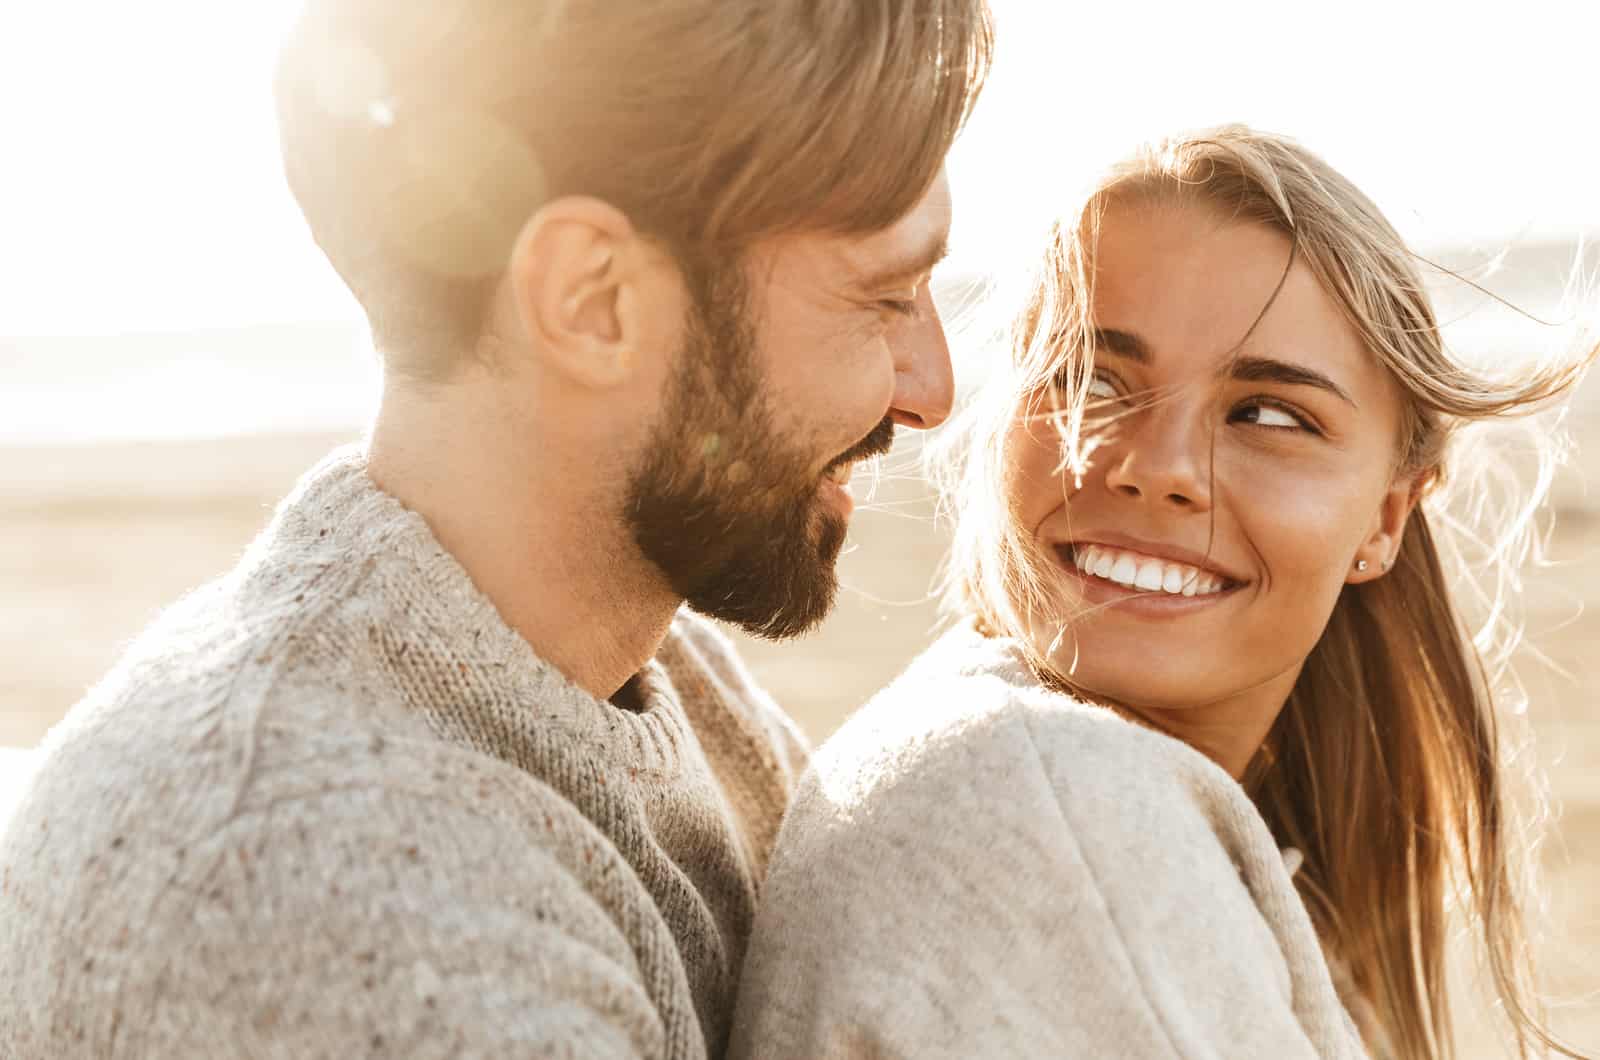 Signs You Are Unofficially Dating: Move On Or DTR?